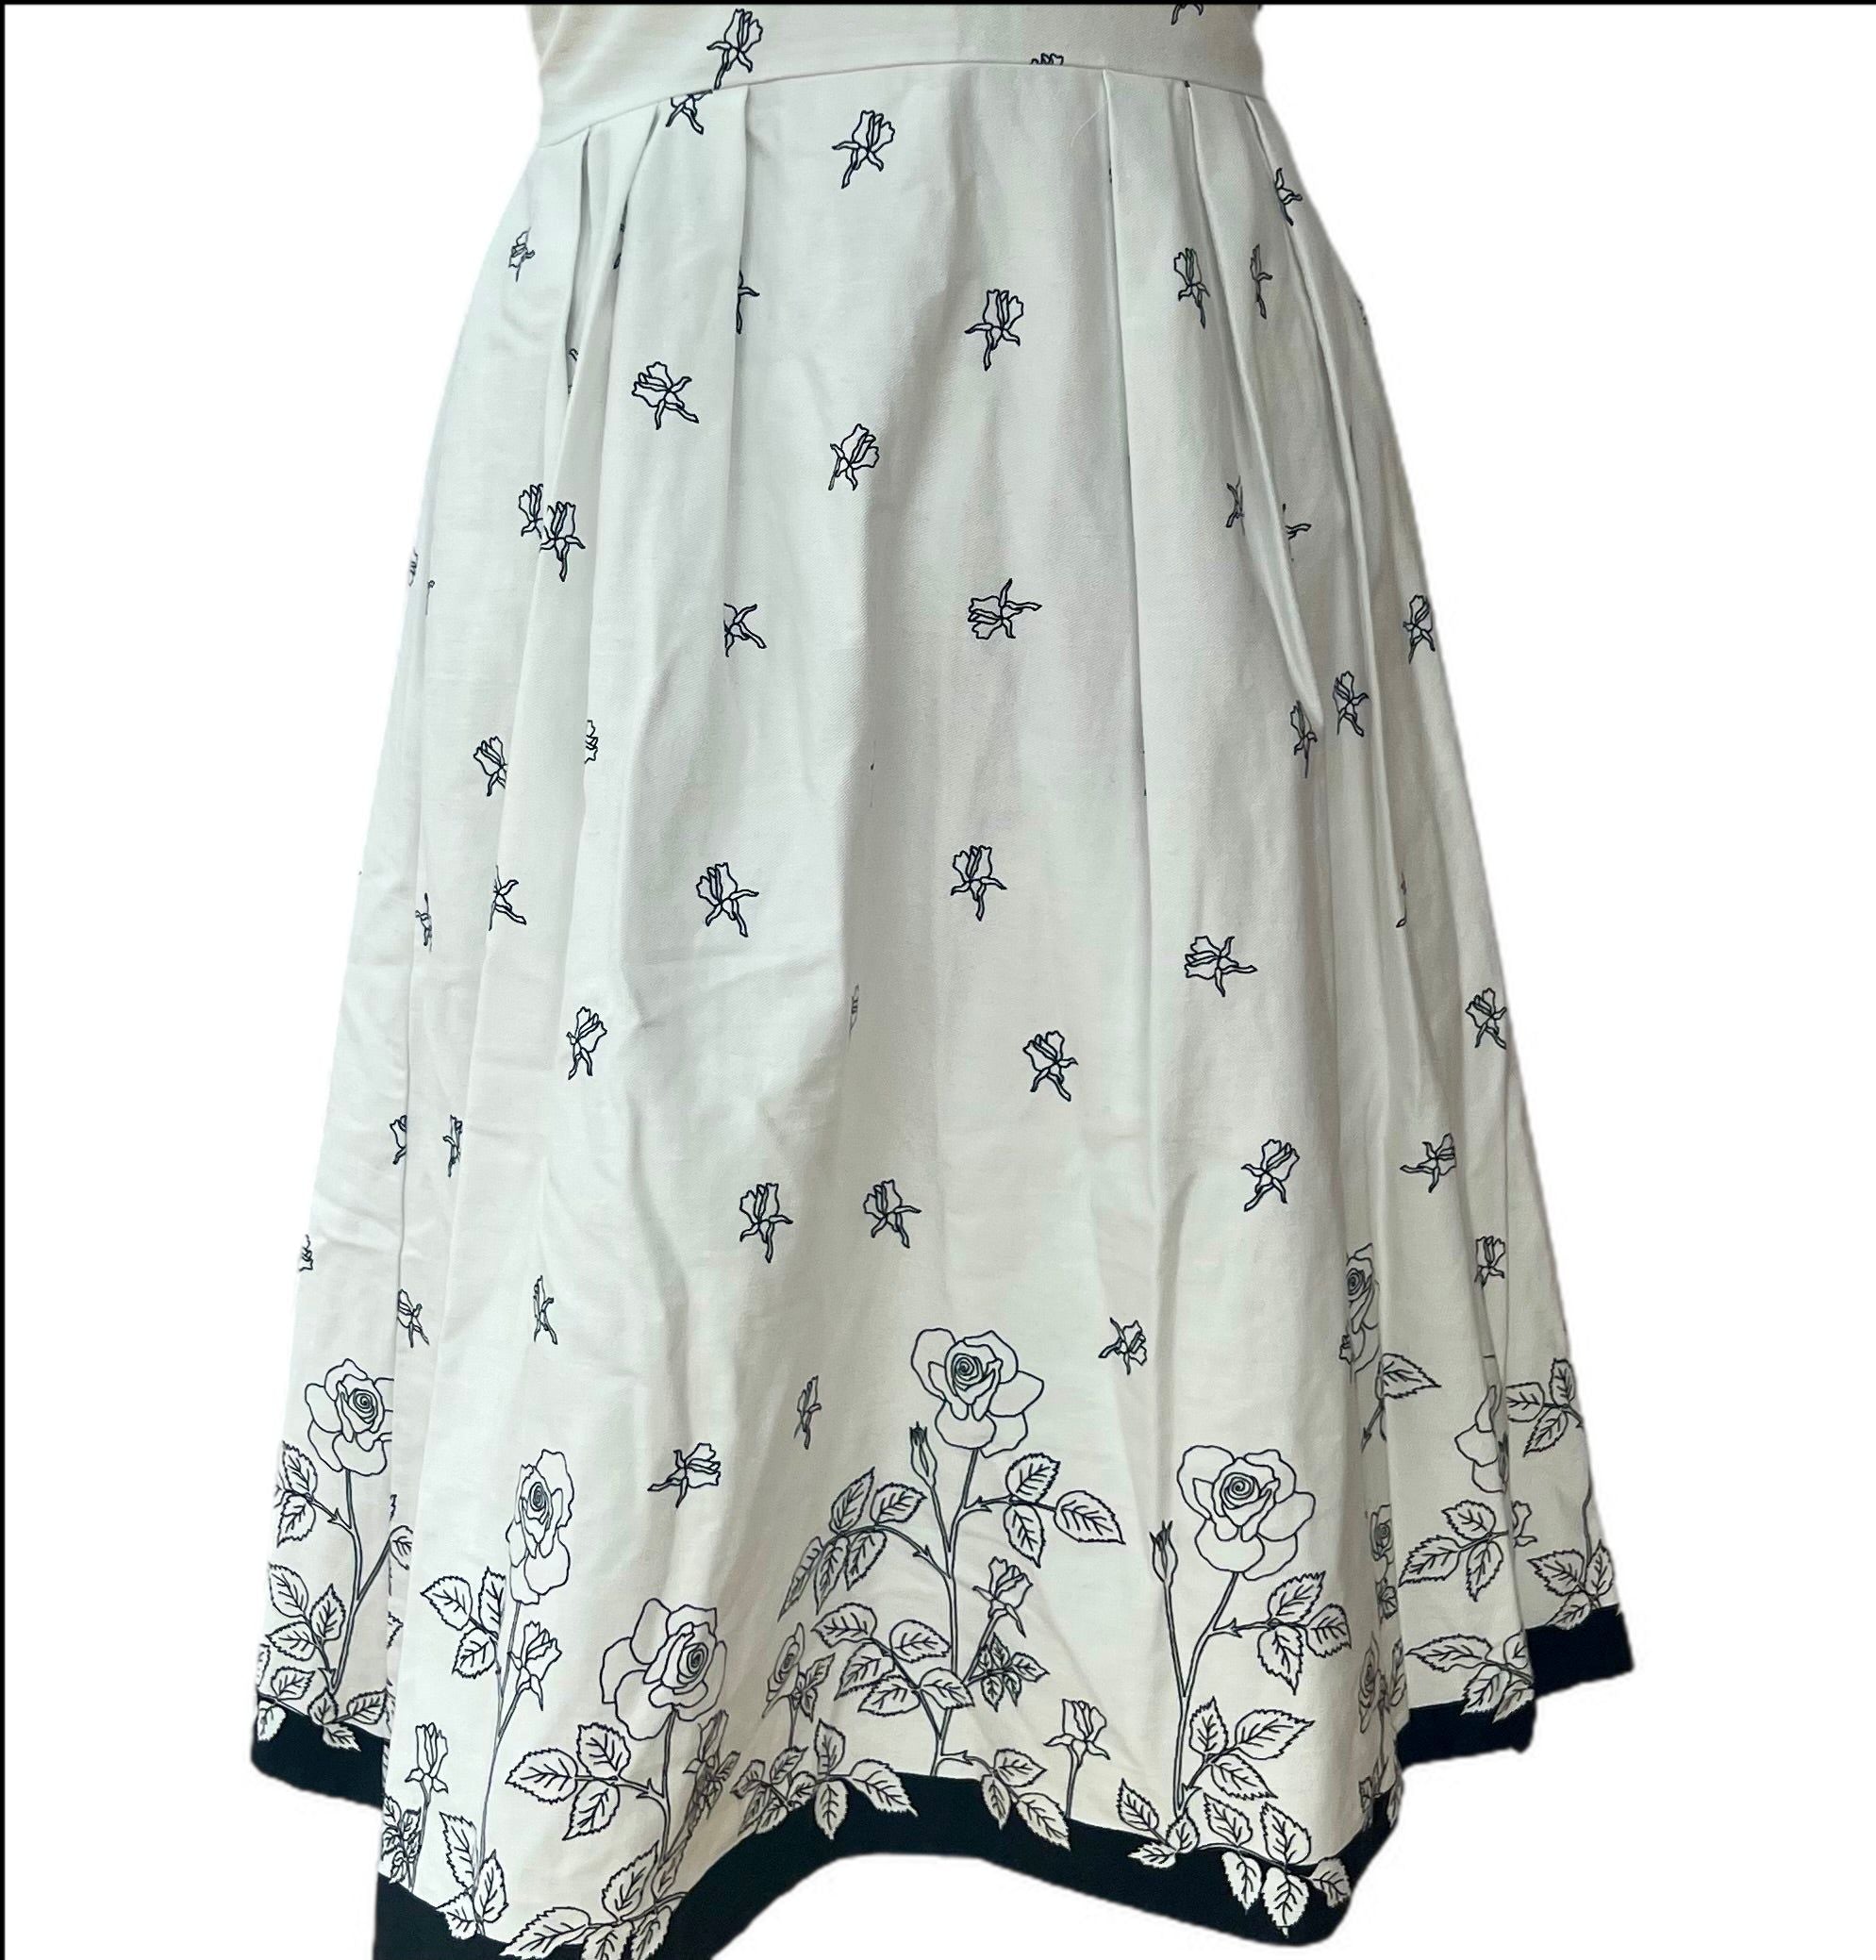 Gorgeous white apron style short sleeve dress with black flowers is made in England